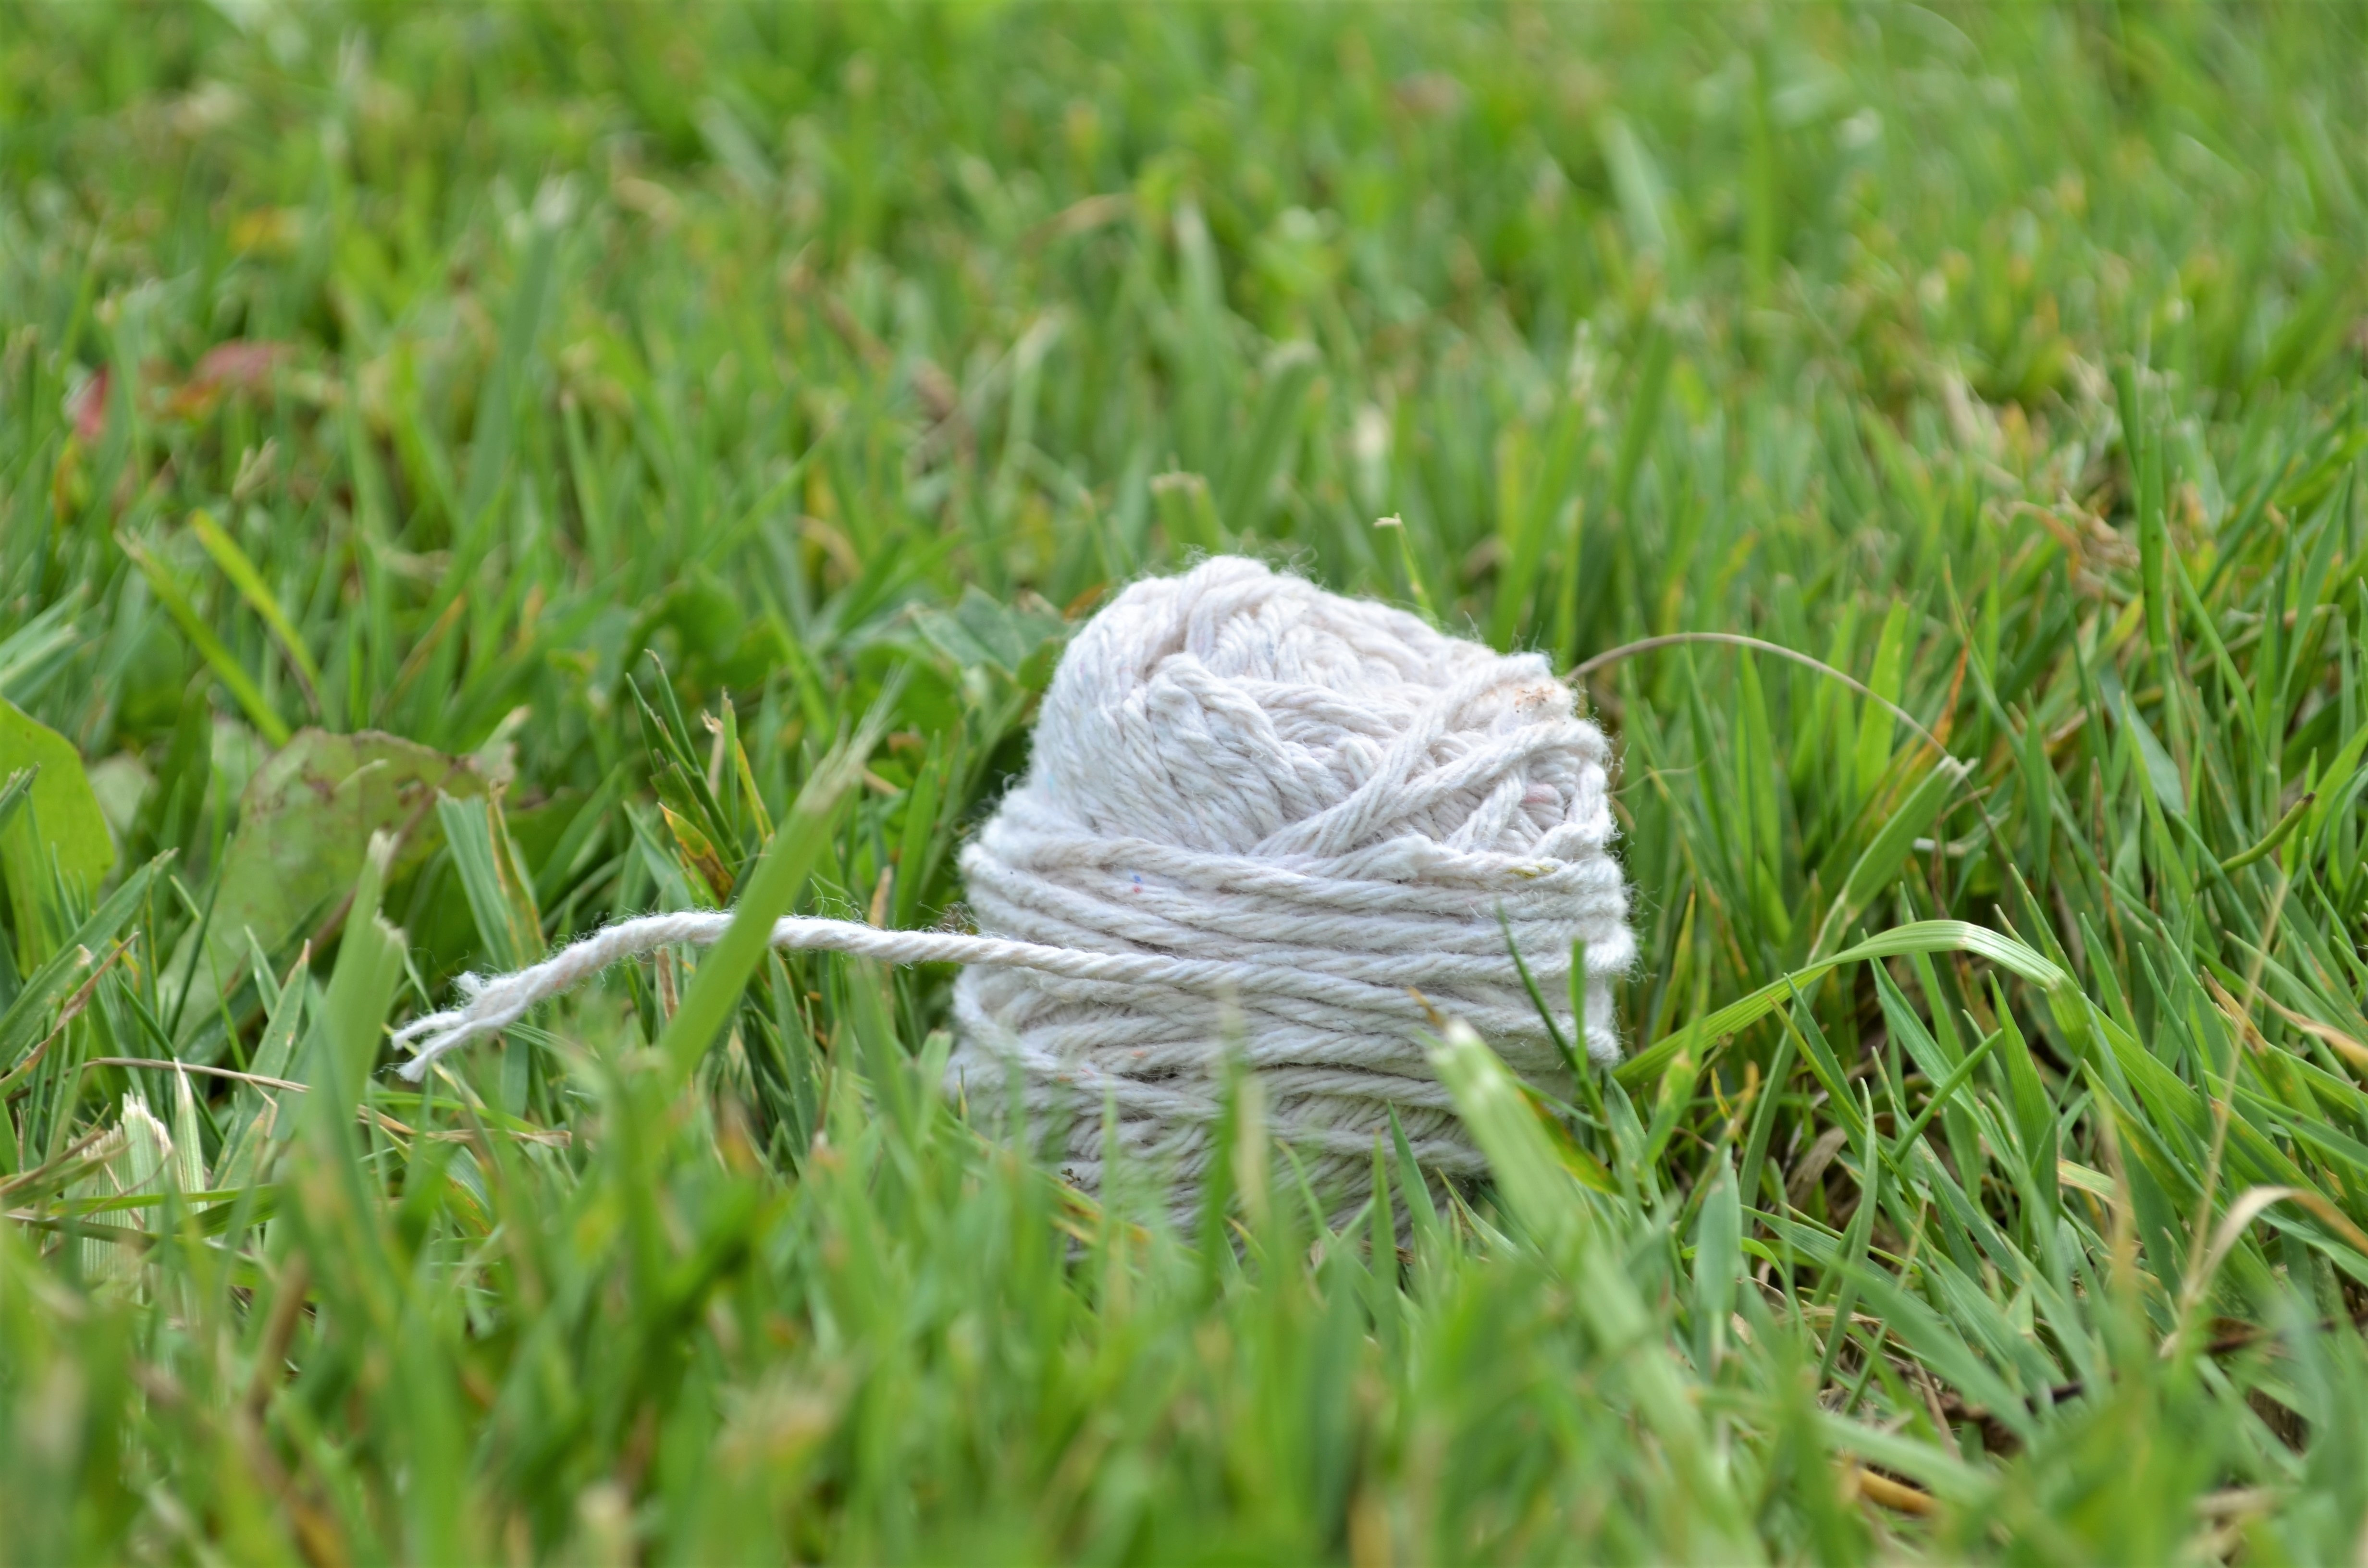 Close up of some string on some grass